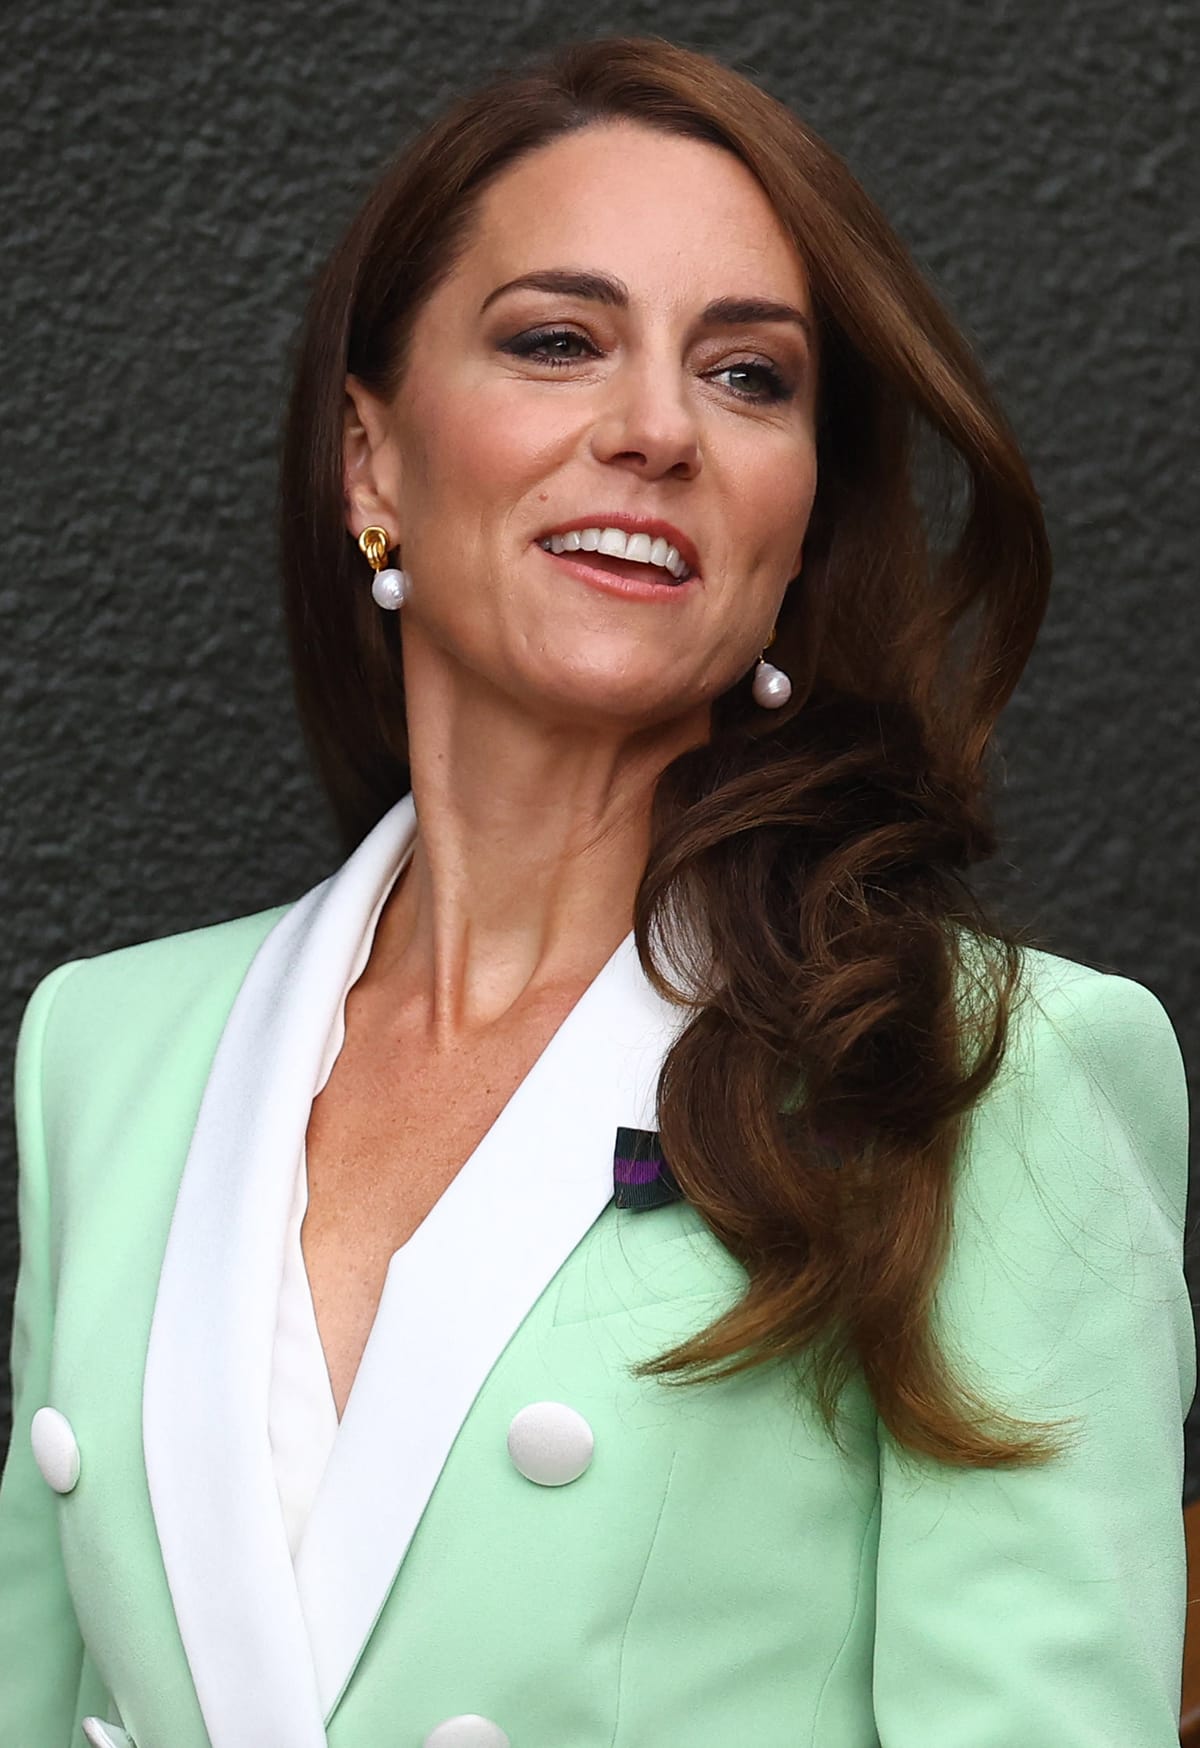 Kate Middleton enhances her beautiful features with brown smokey eyeshadow and red lipstick and styles her tresses in soft curls